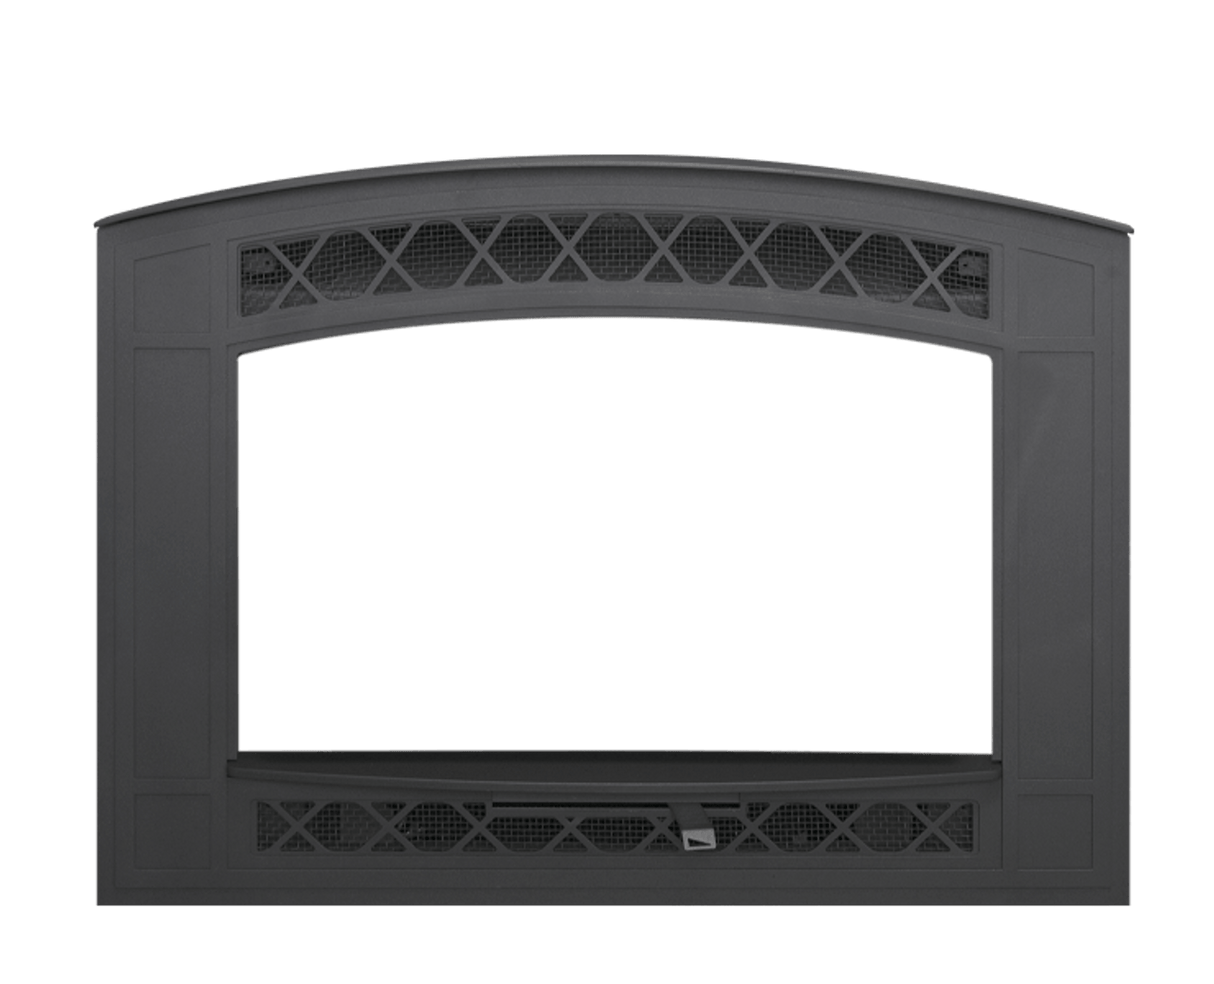 Pacific Energy FP30 Arch LE Wood Zero-Clearance Fireplace